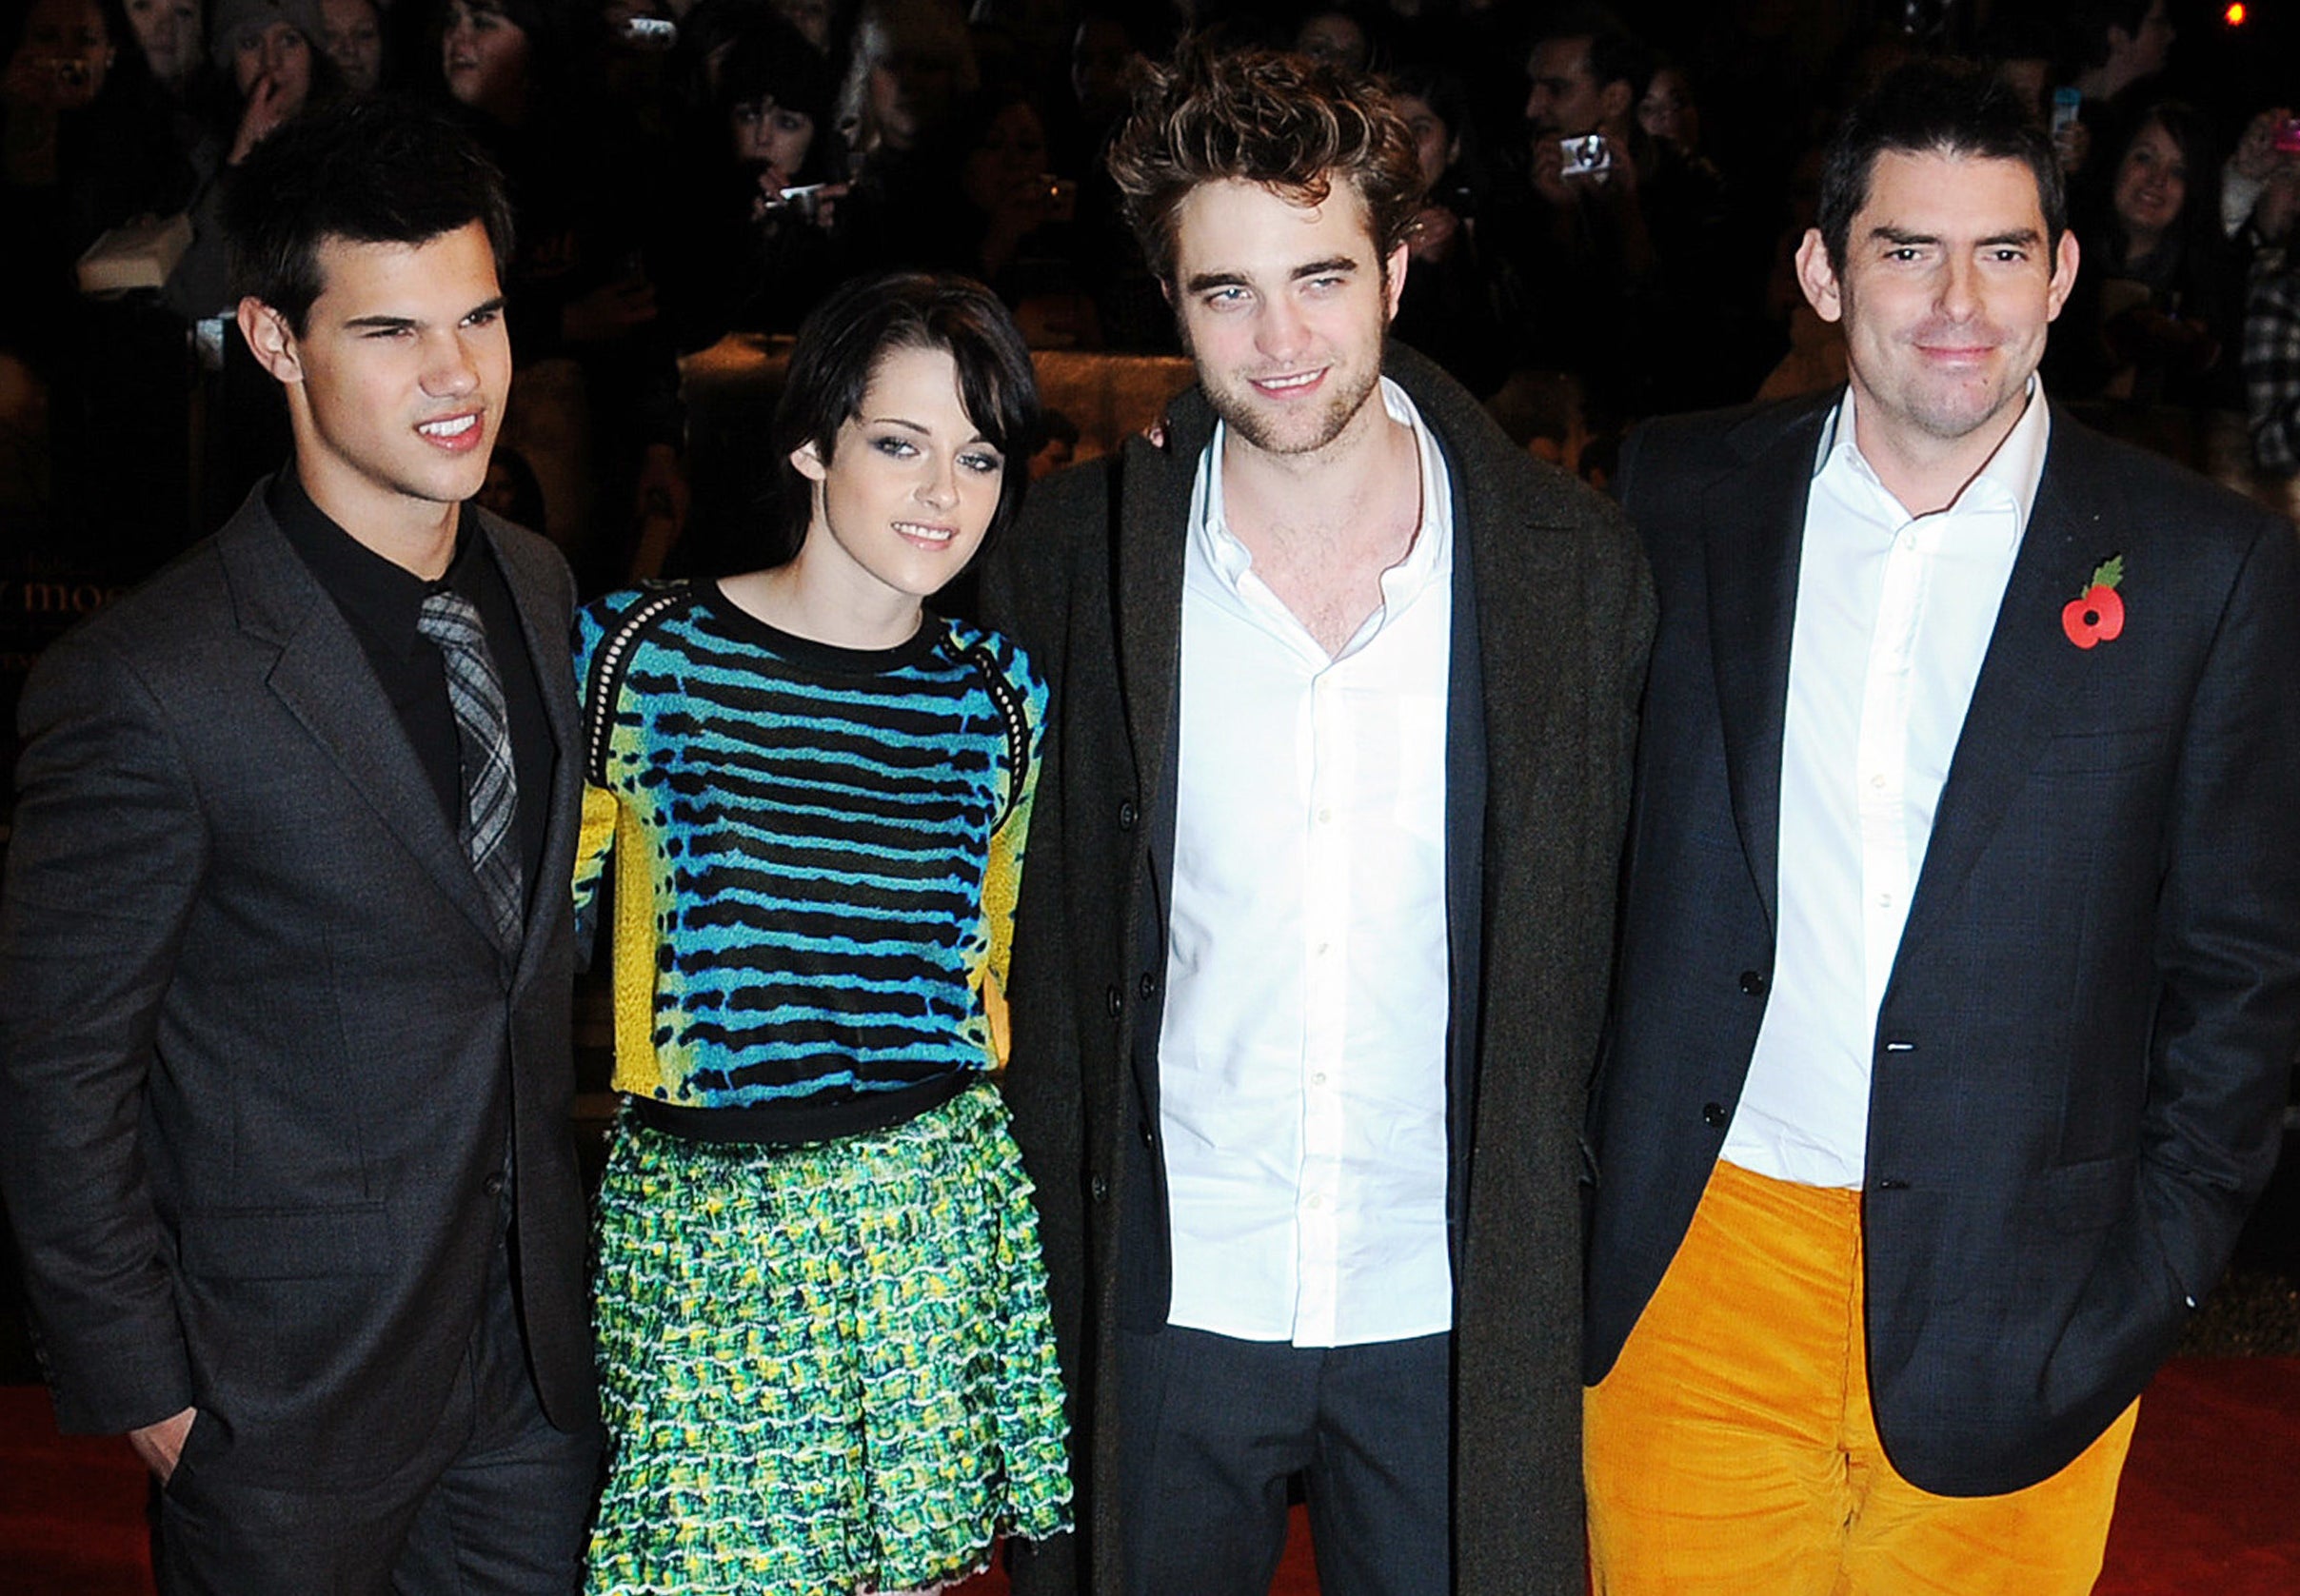 The Twilight cast with Chris